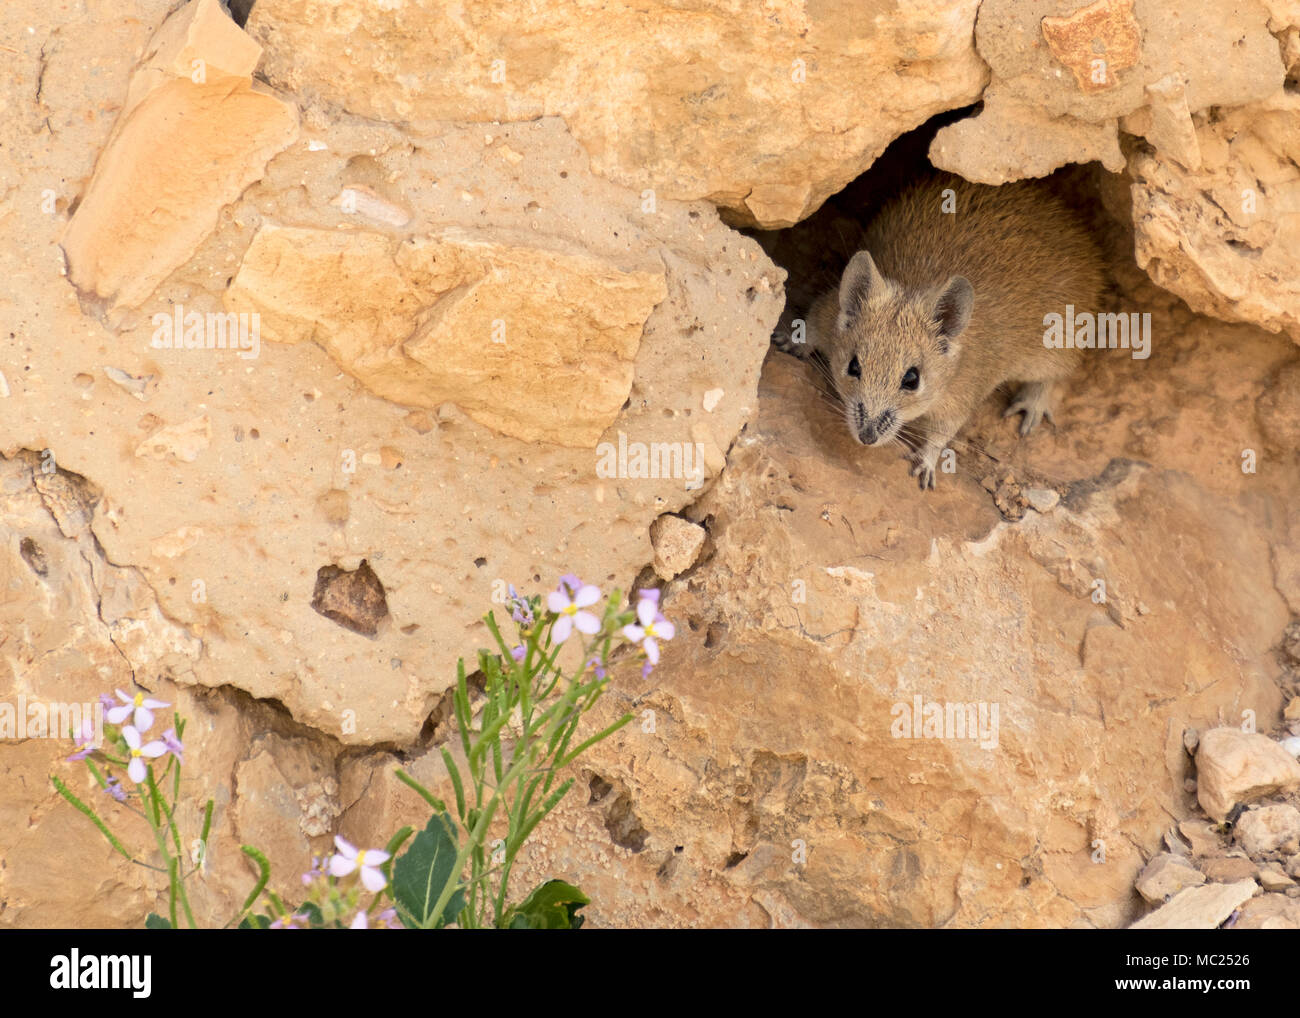 a golden spiny mouse at Masada, Israel looking at a wildflower Stock Photo